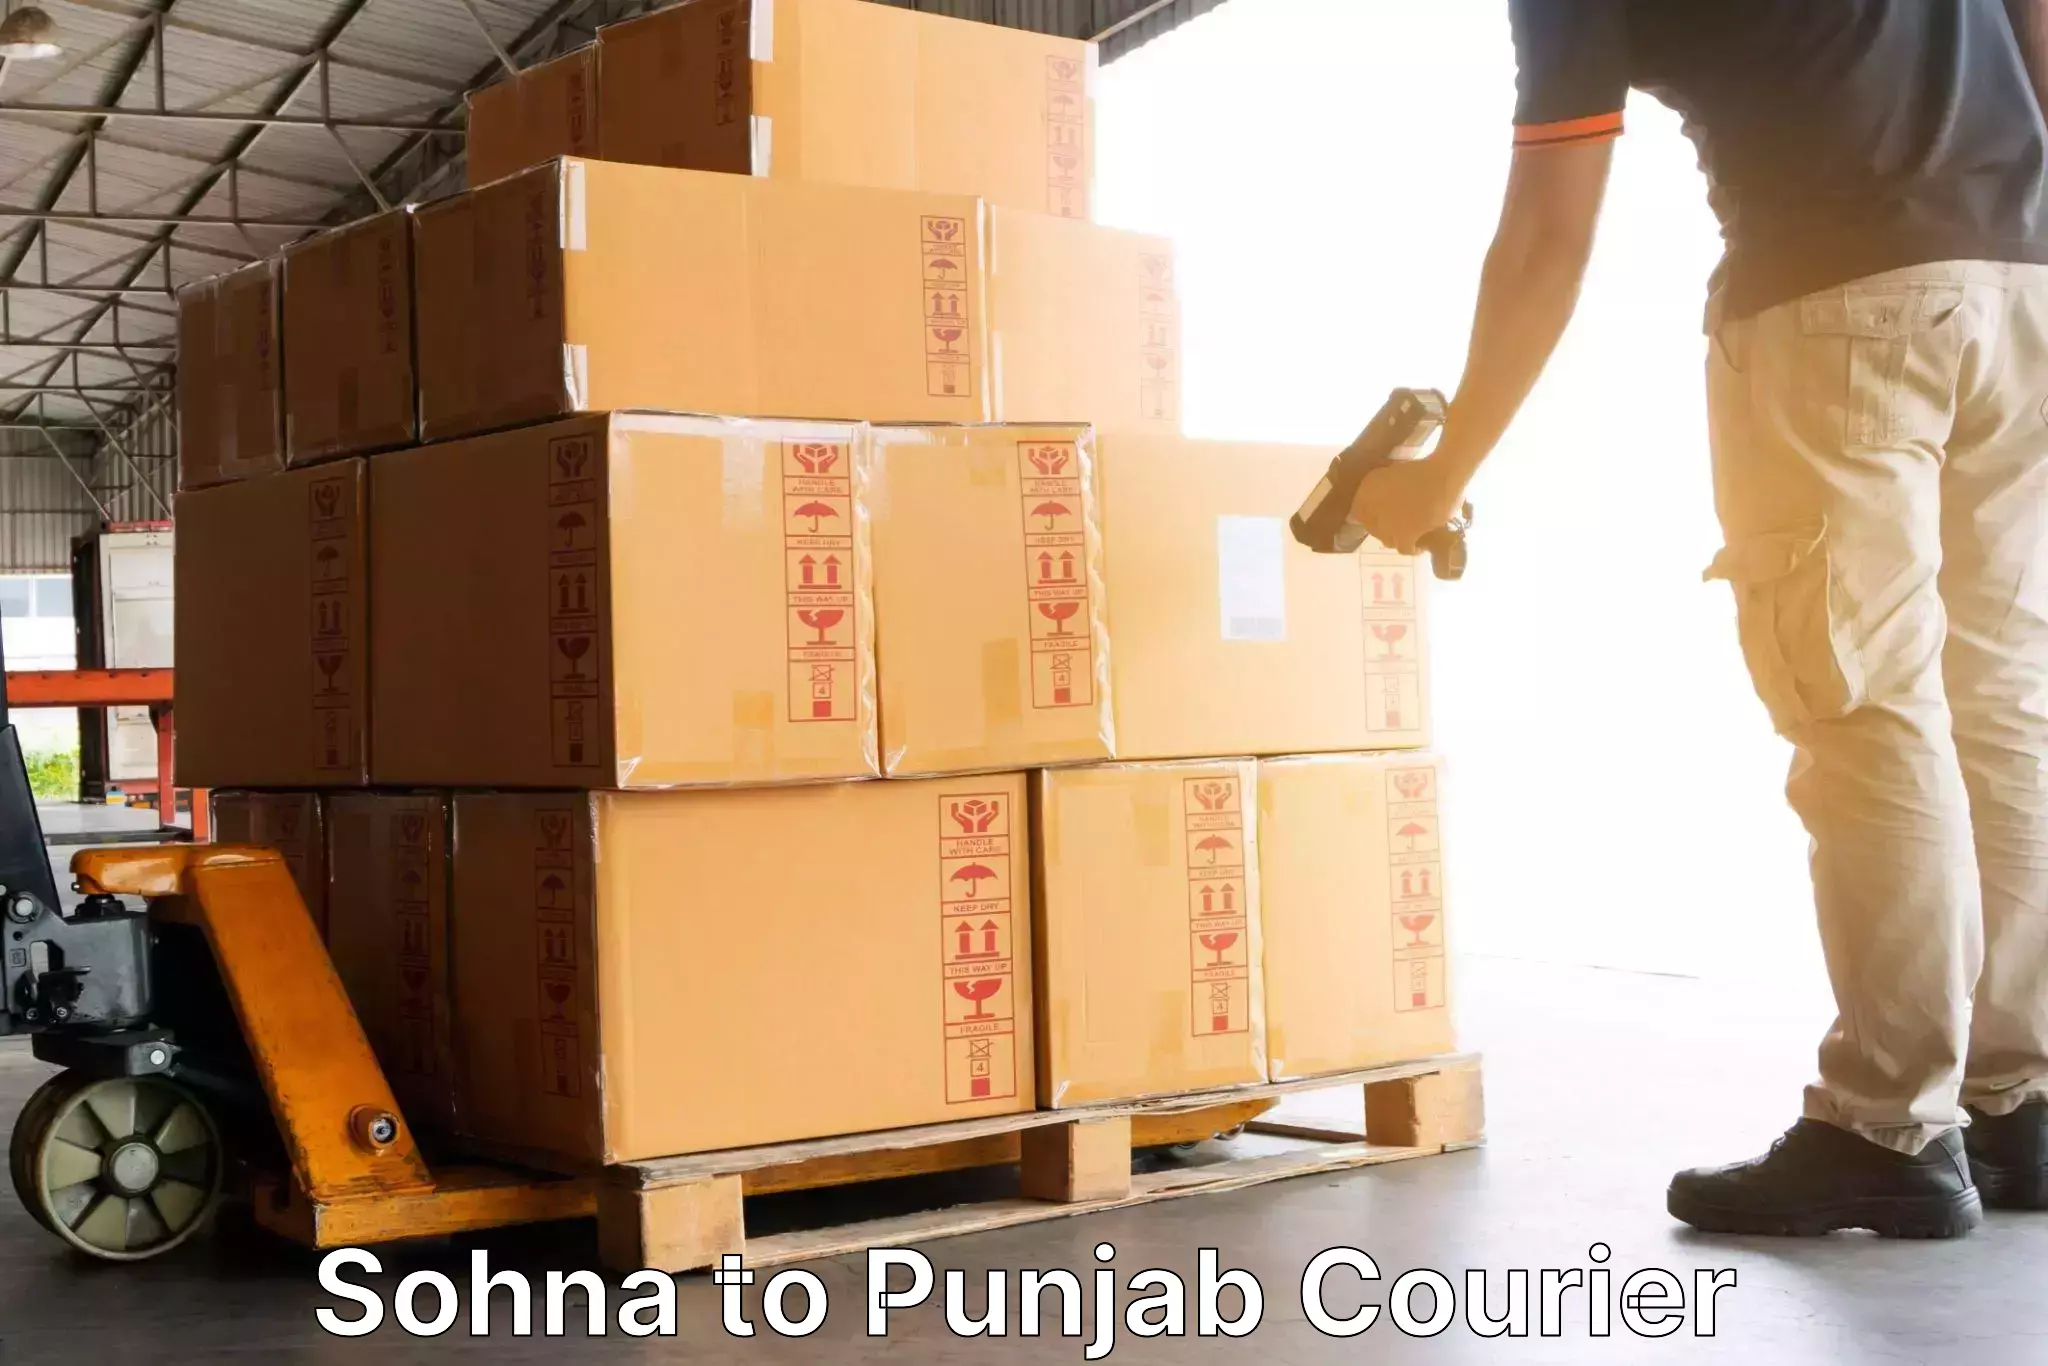 Next-day delivery options Sohna to Amritsar